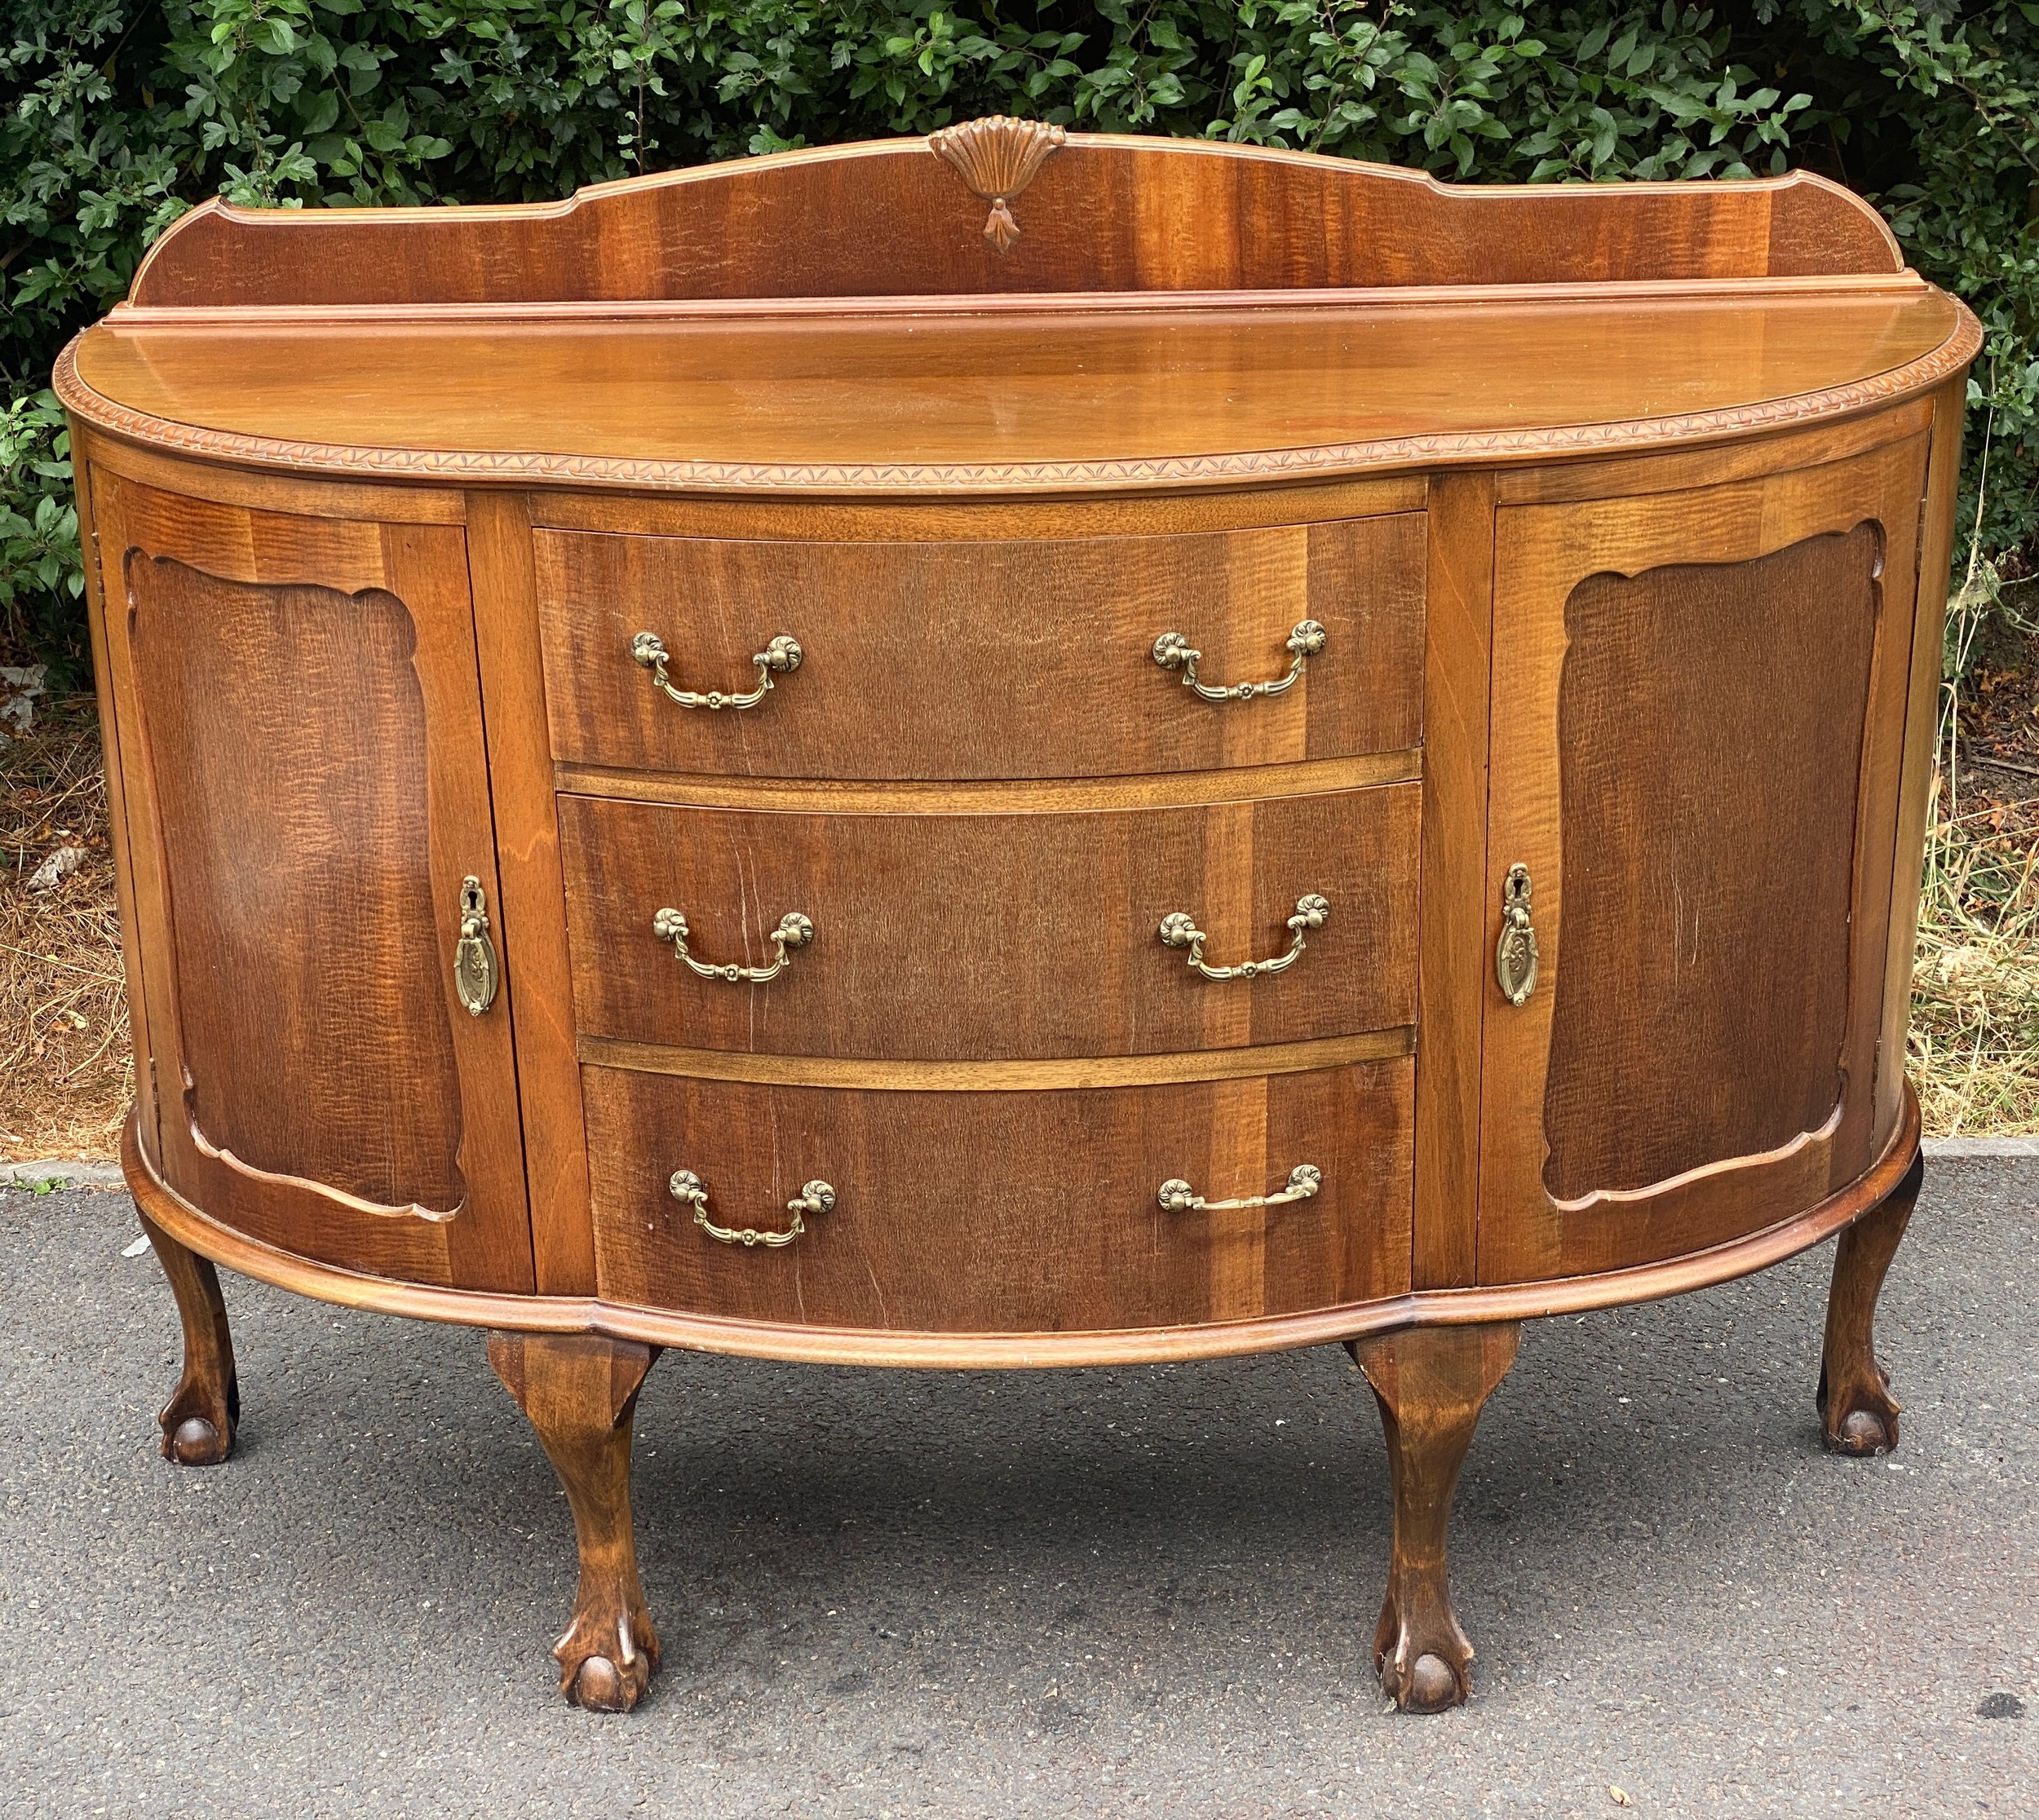 Vintage two door three drawer ball and claw sideboard with key measures approx 41.5 inches high by